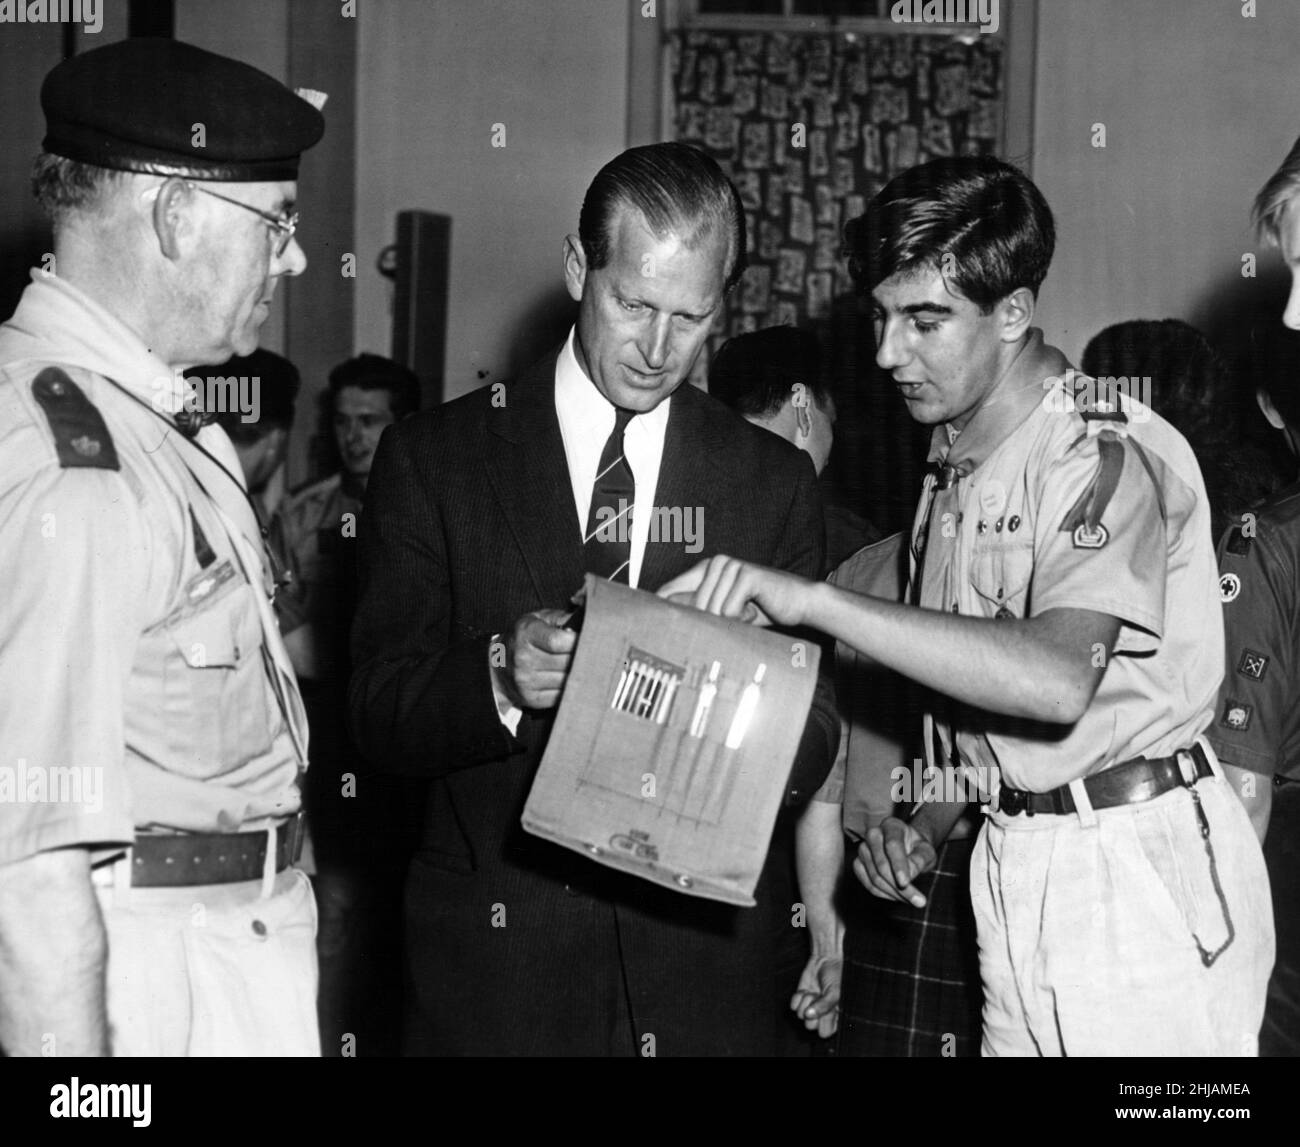 Andre Hobro aged 18, of 279 Birmingham Scout Group at Hall Green explains a map to the Duke of Edinburgh at Blucher Street. 24th October 1962. Stock Photo